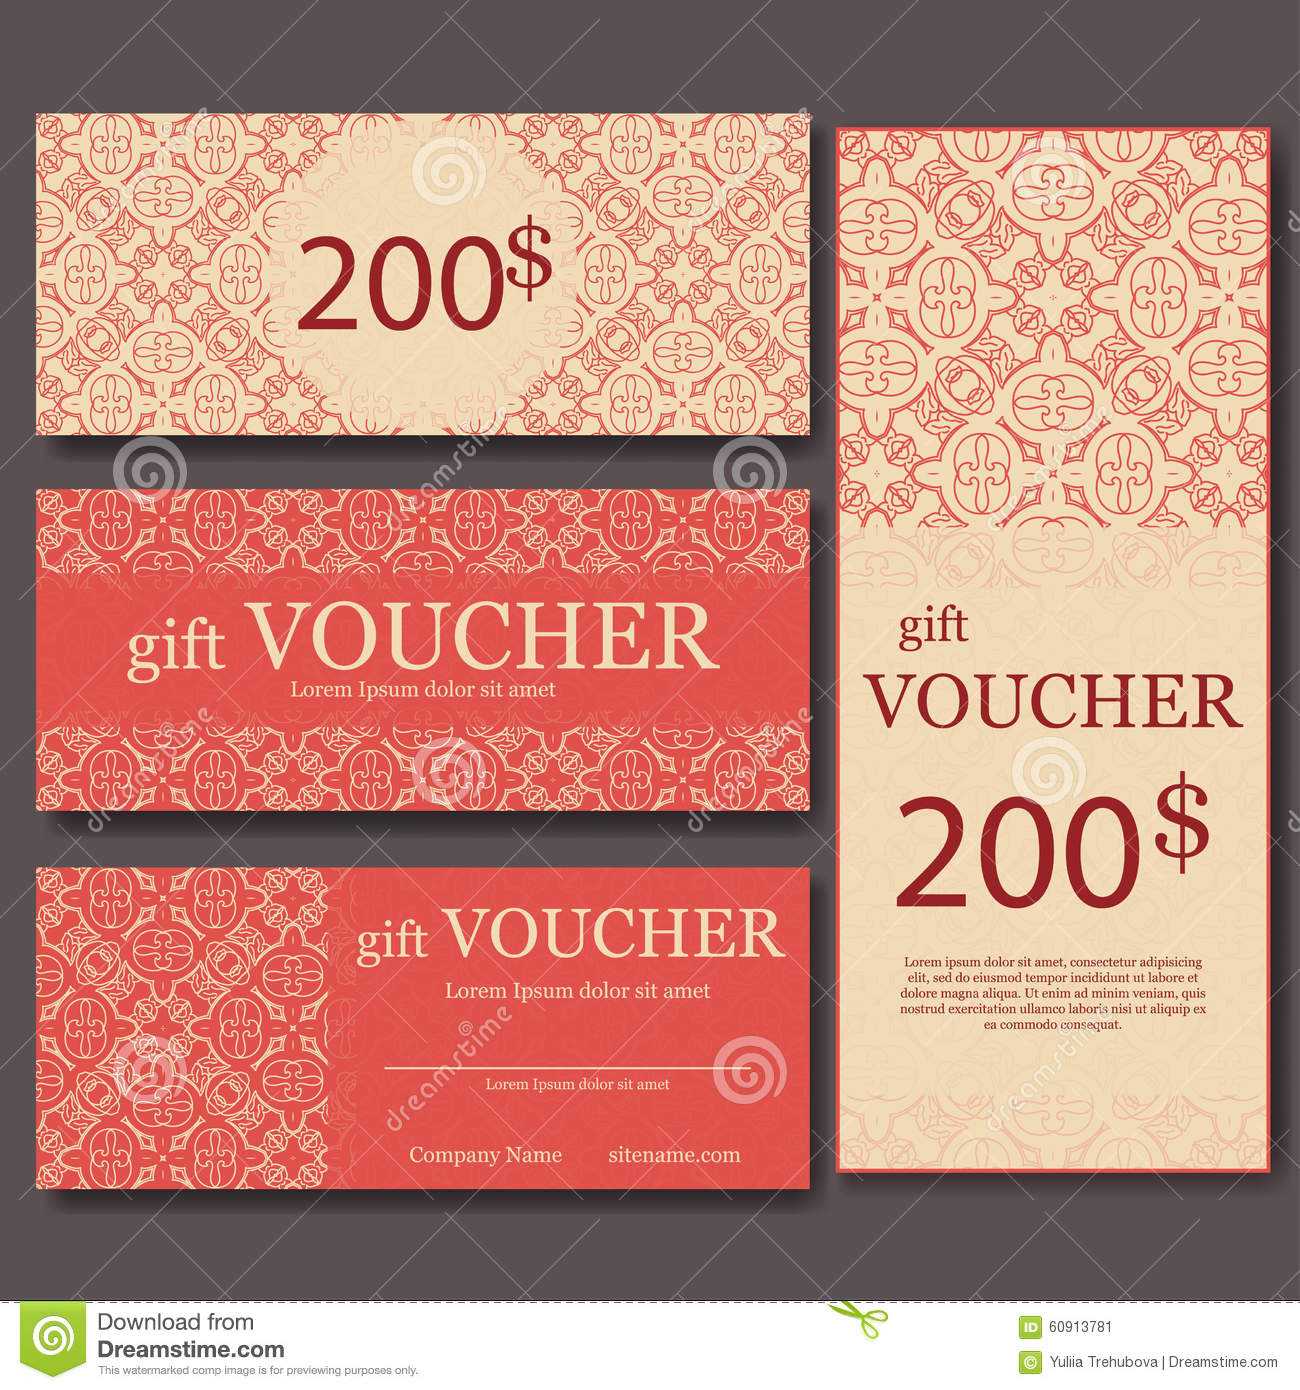 Gift Voucher Template With Mandala. Design Certificate For Inside Magazine Subscription Gift Certificate Template